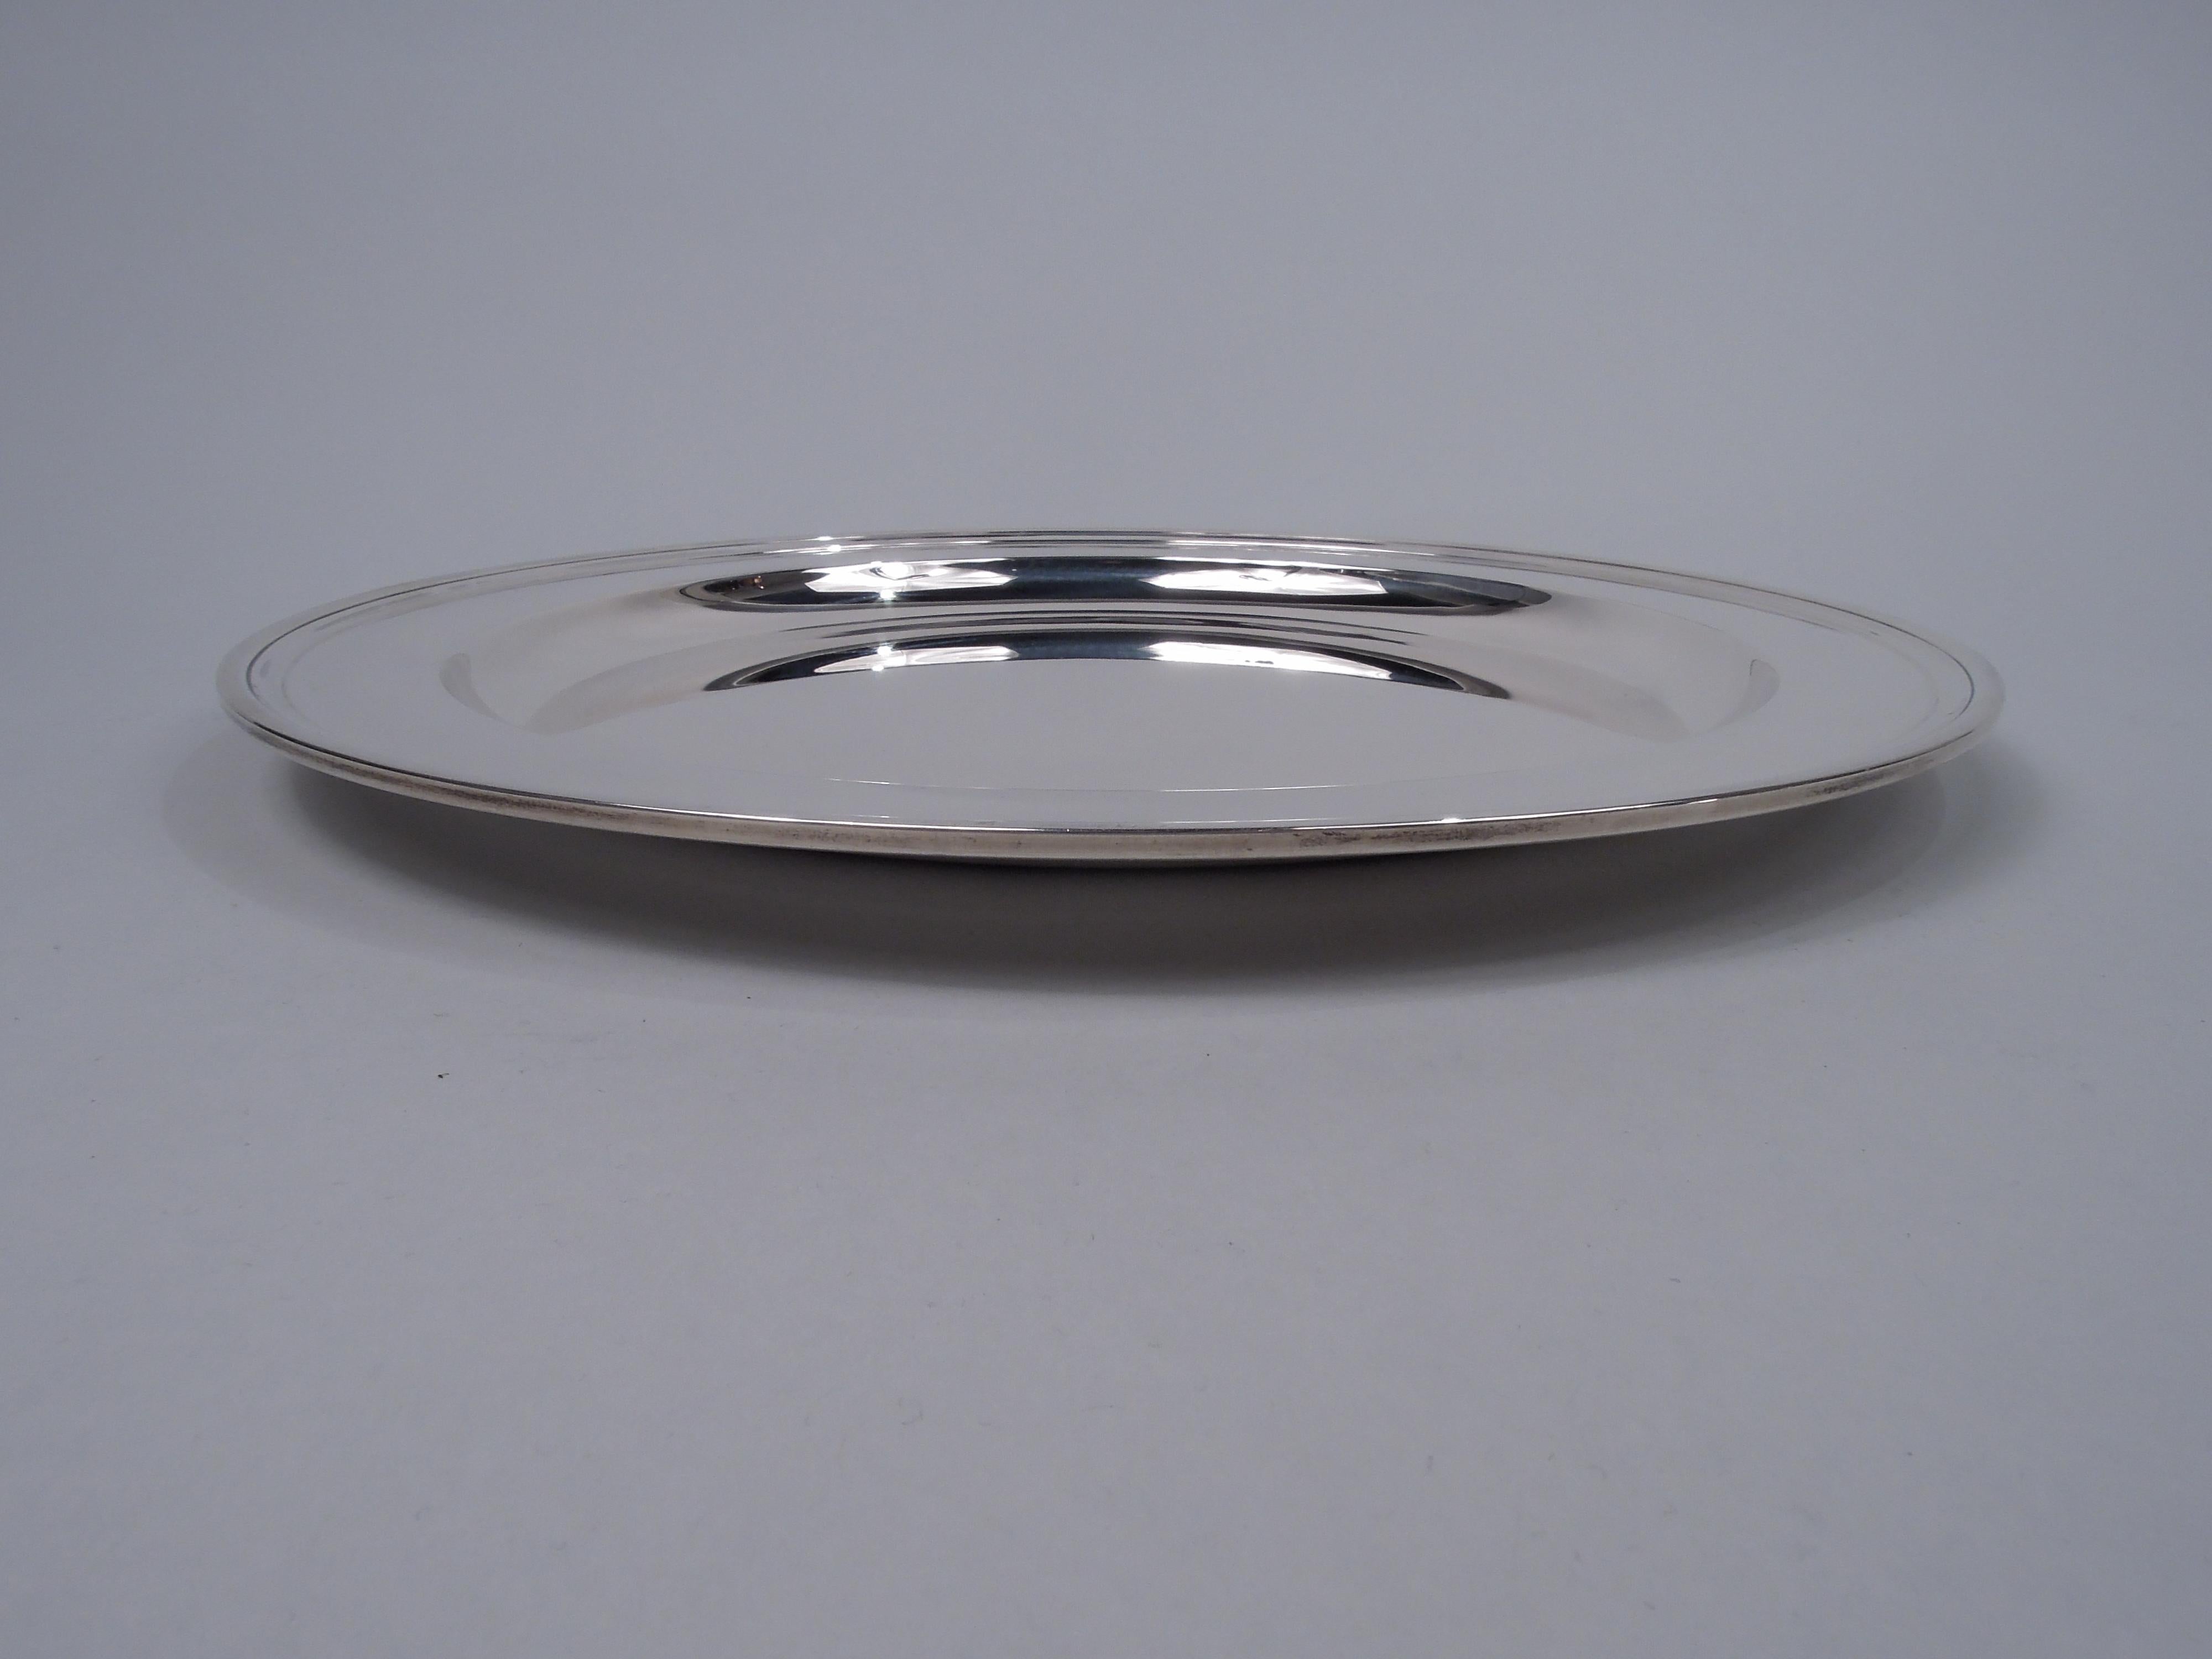 Modern sterling silver tray. Made by Tiffany & Co. in New York. Deep well, wide shoulder, and flat rim. Fully marked including maker’s stamp, pattern no. 20188, and director's letter L (1956-ca 1965). Heavy weight: 28.5 troy ounces.  